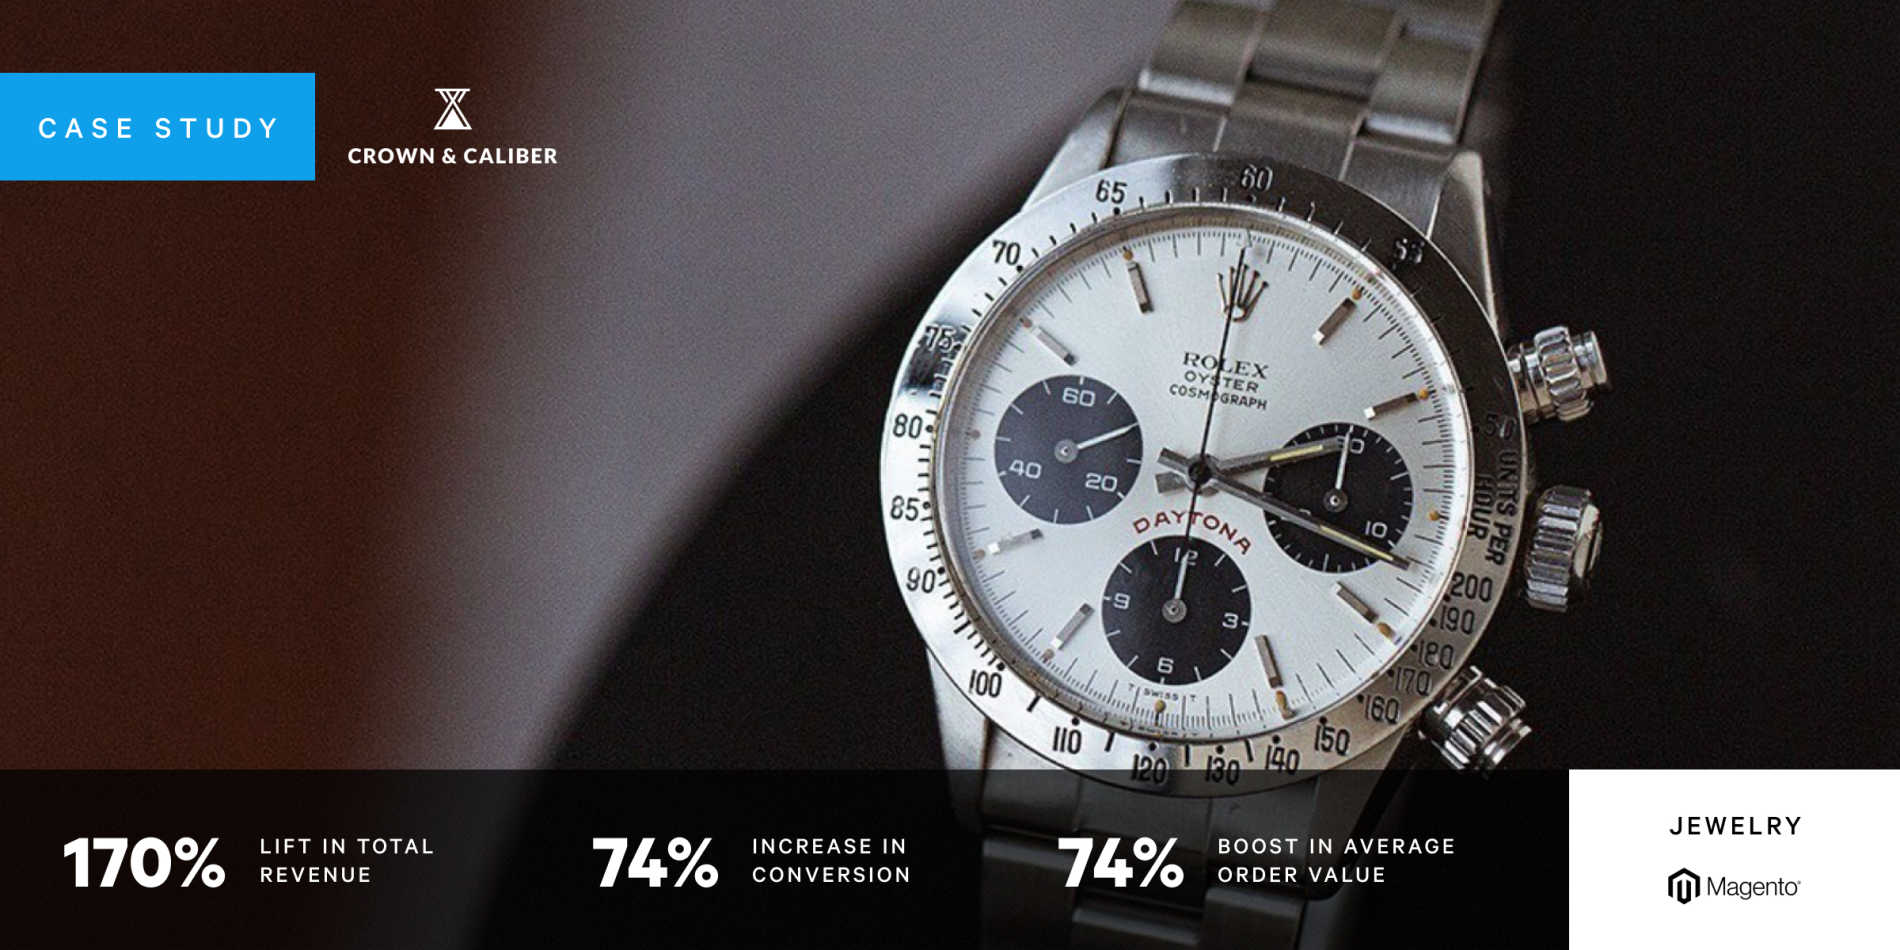 Cover image with luxury watch and data bar for Affirm case study